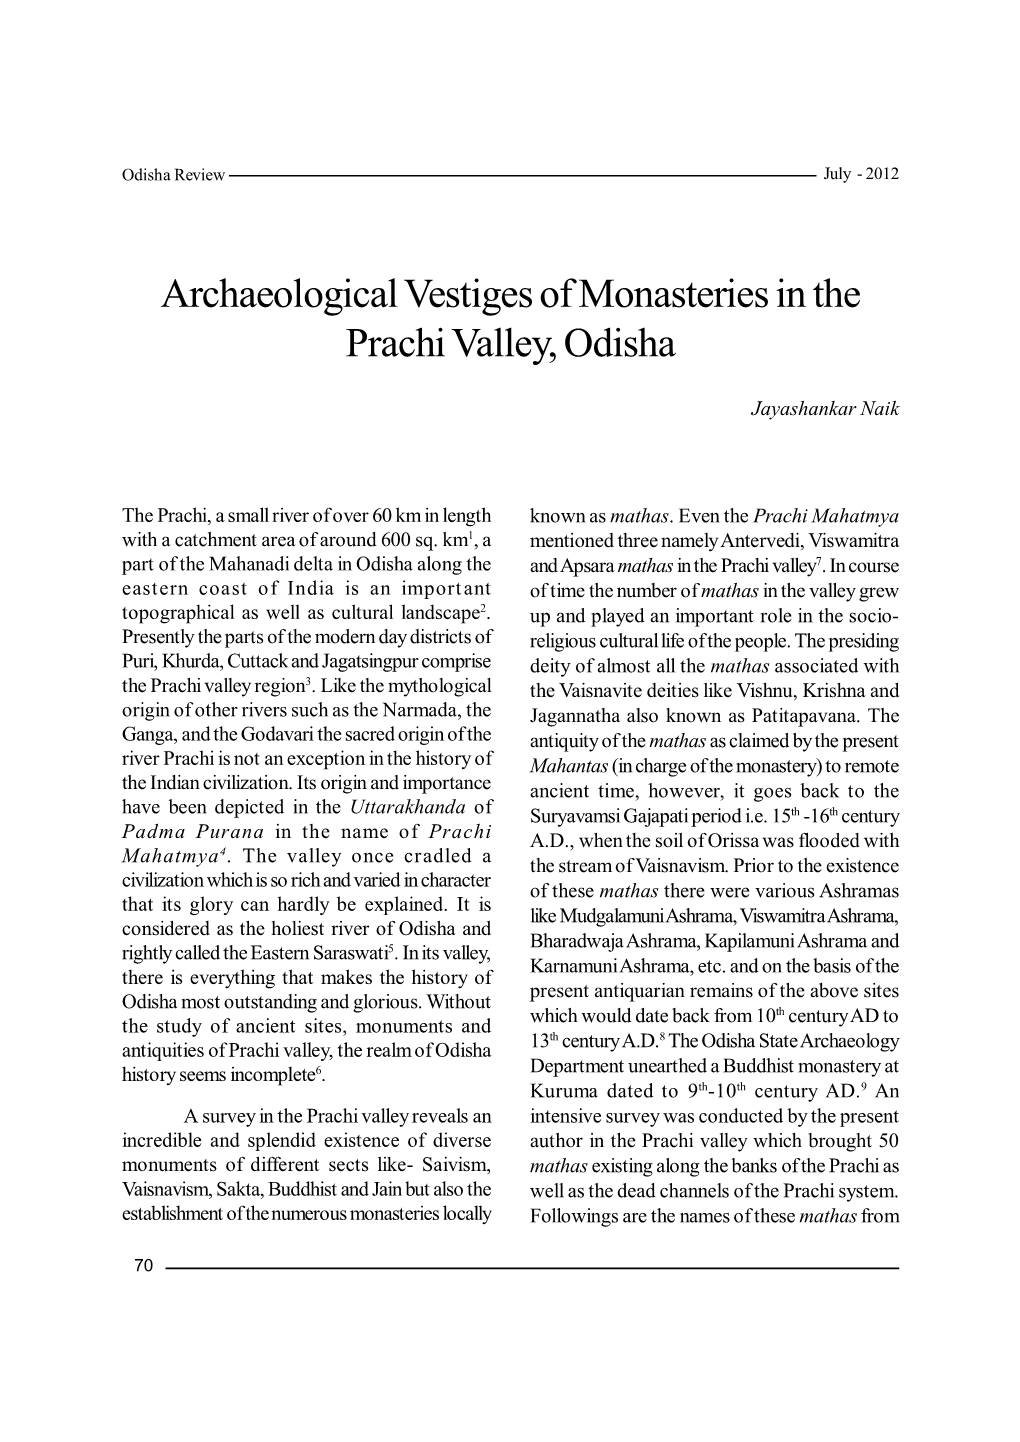 Archaeological Vestiges of Monasteries in the Prachi Valley, Odisha